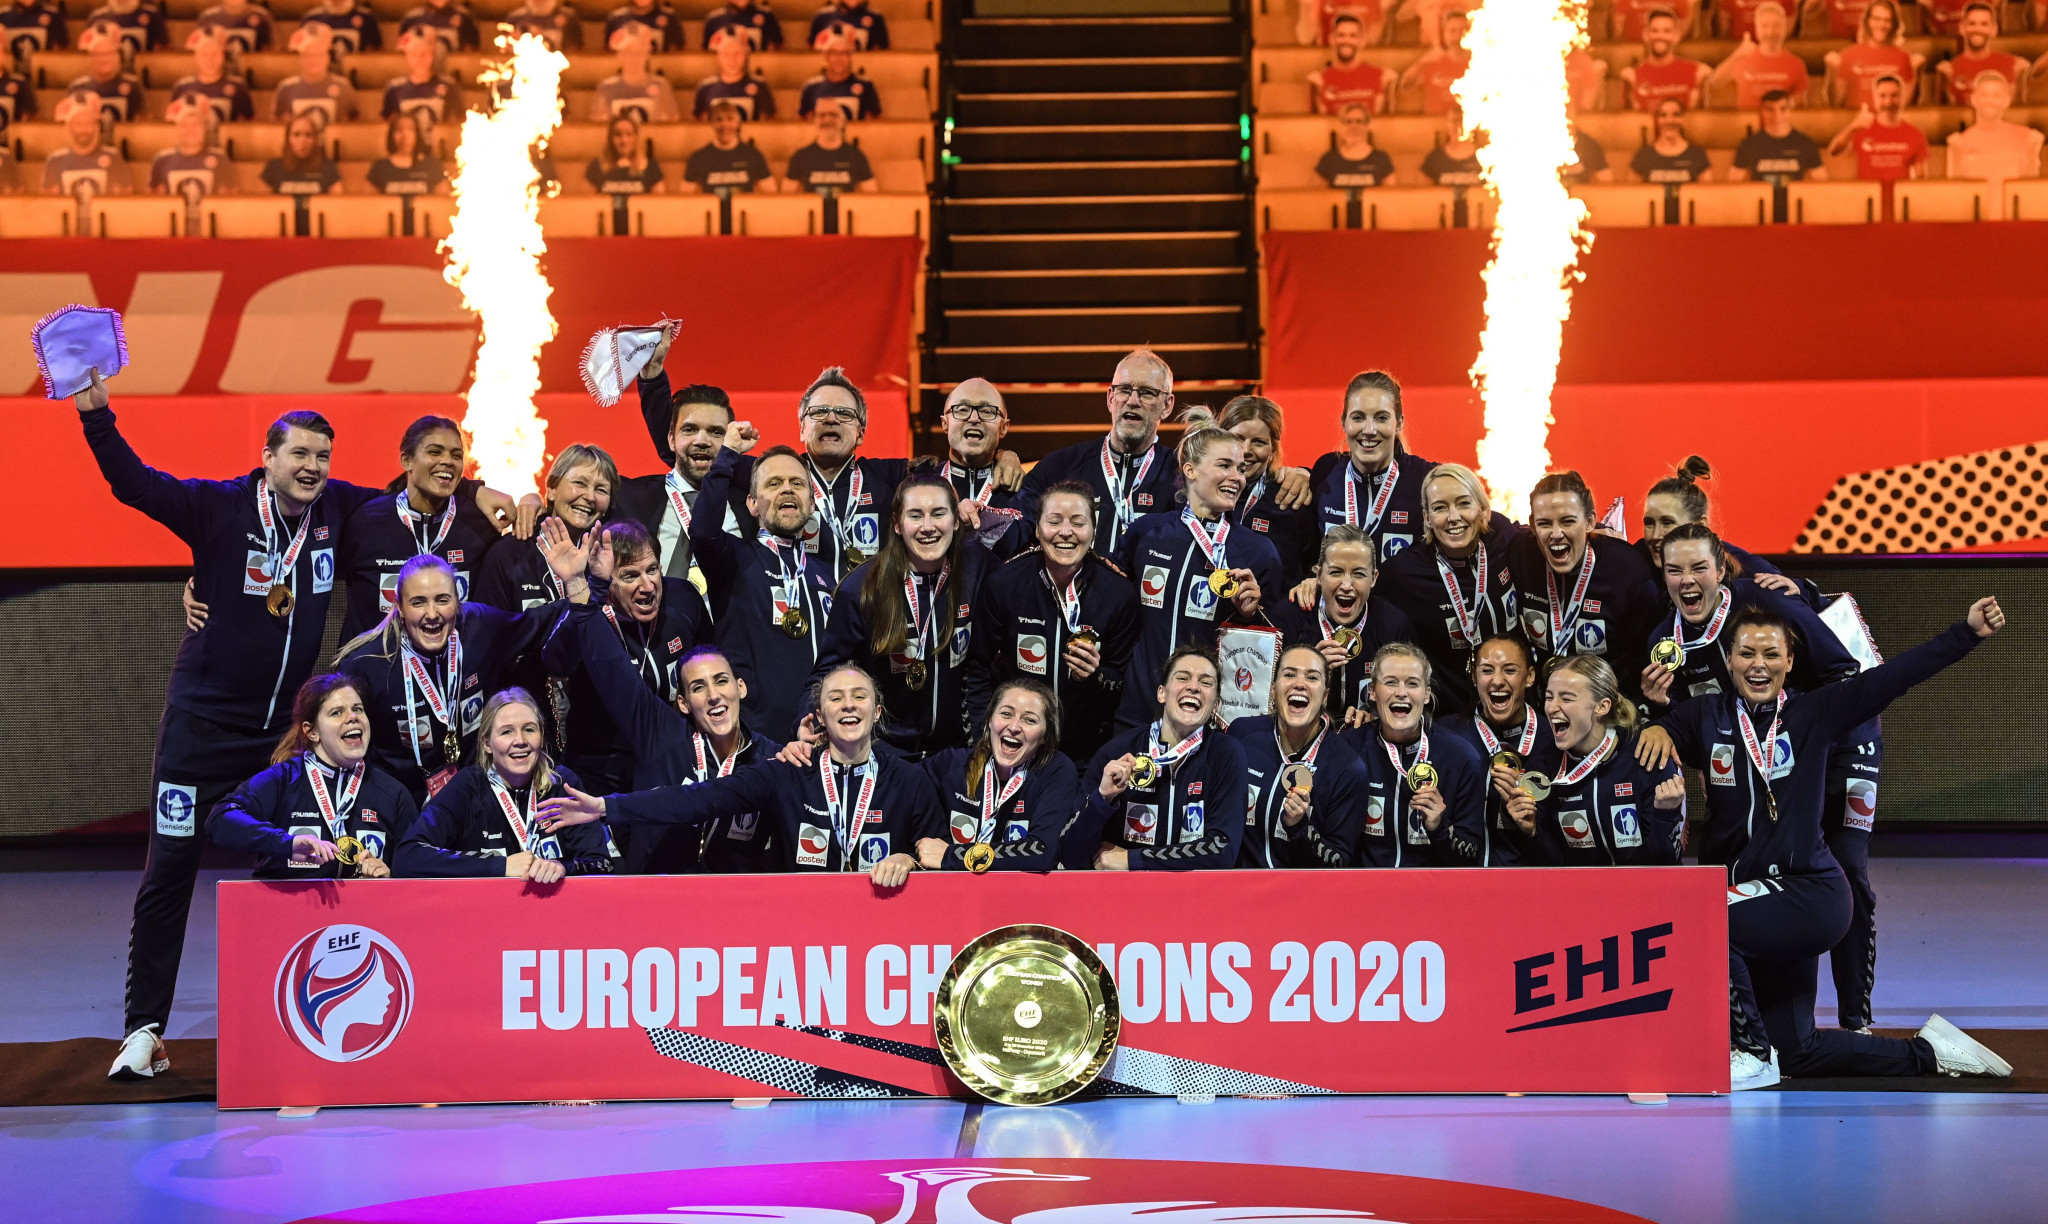 Norway won the Women's European Handball Championships for the eighth time in 2020 ©Getty Images